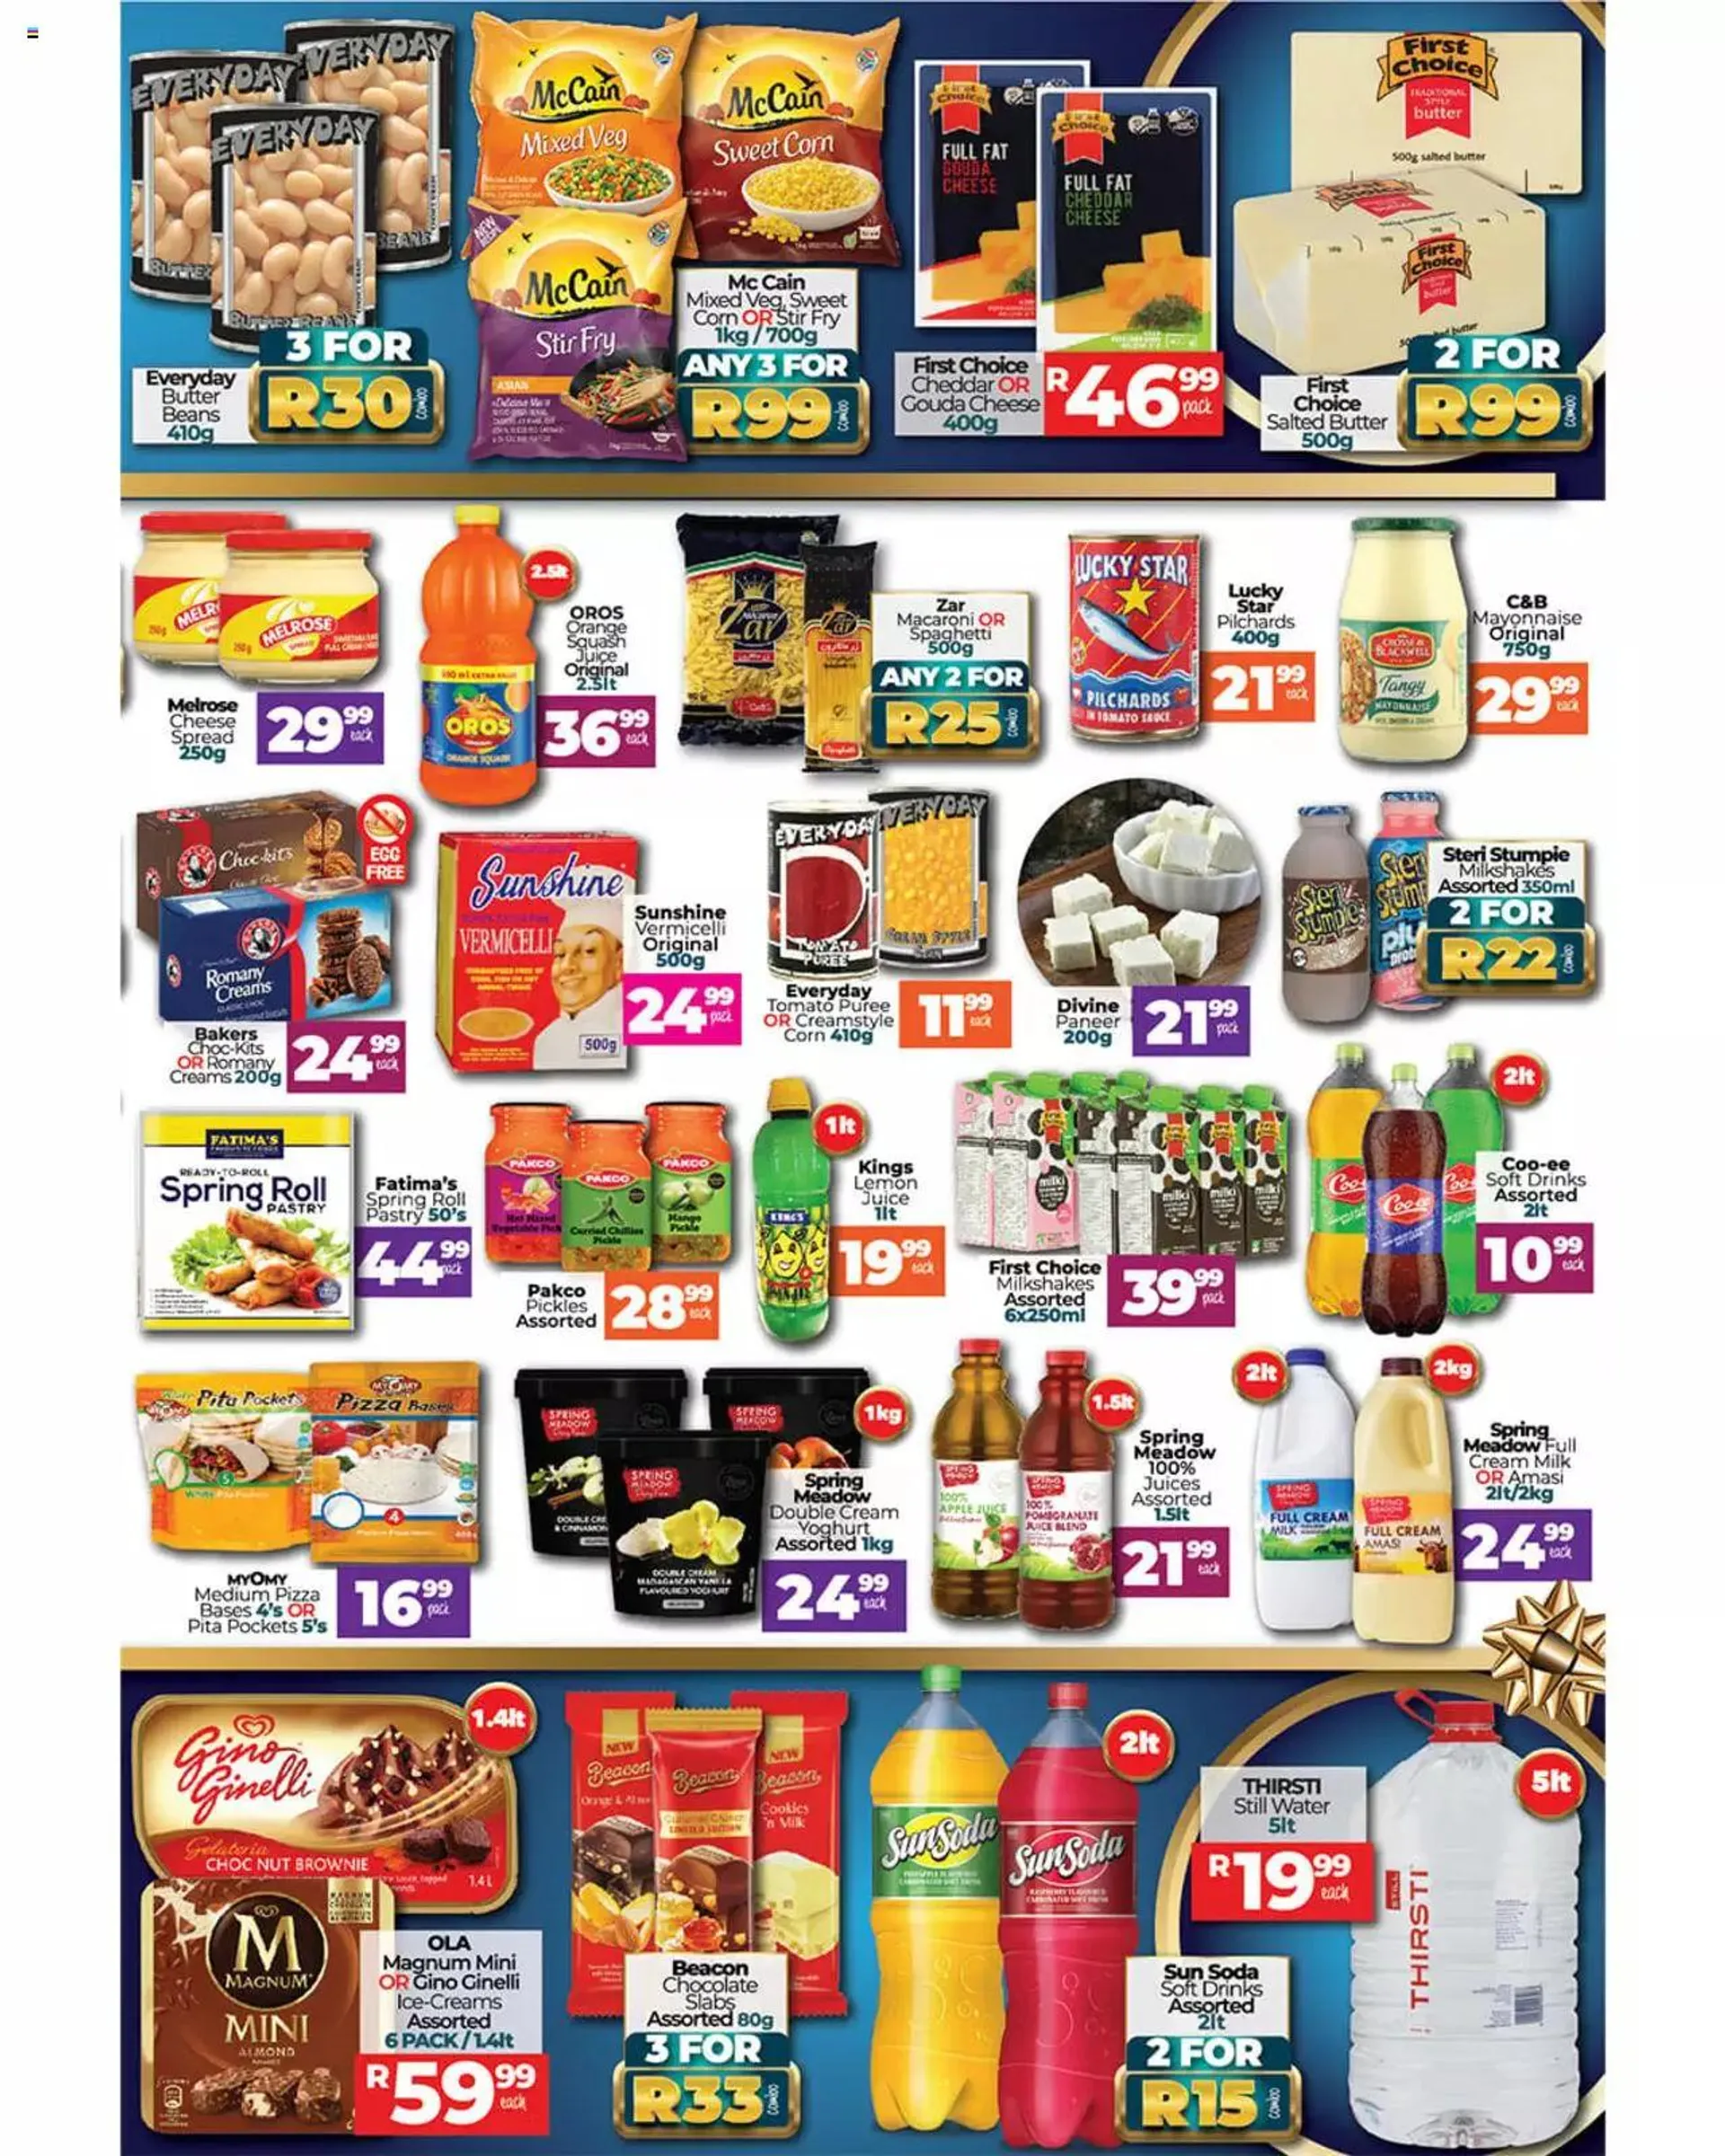 Take n Pay - Specials - 2